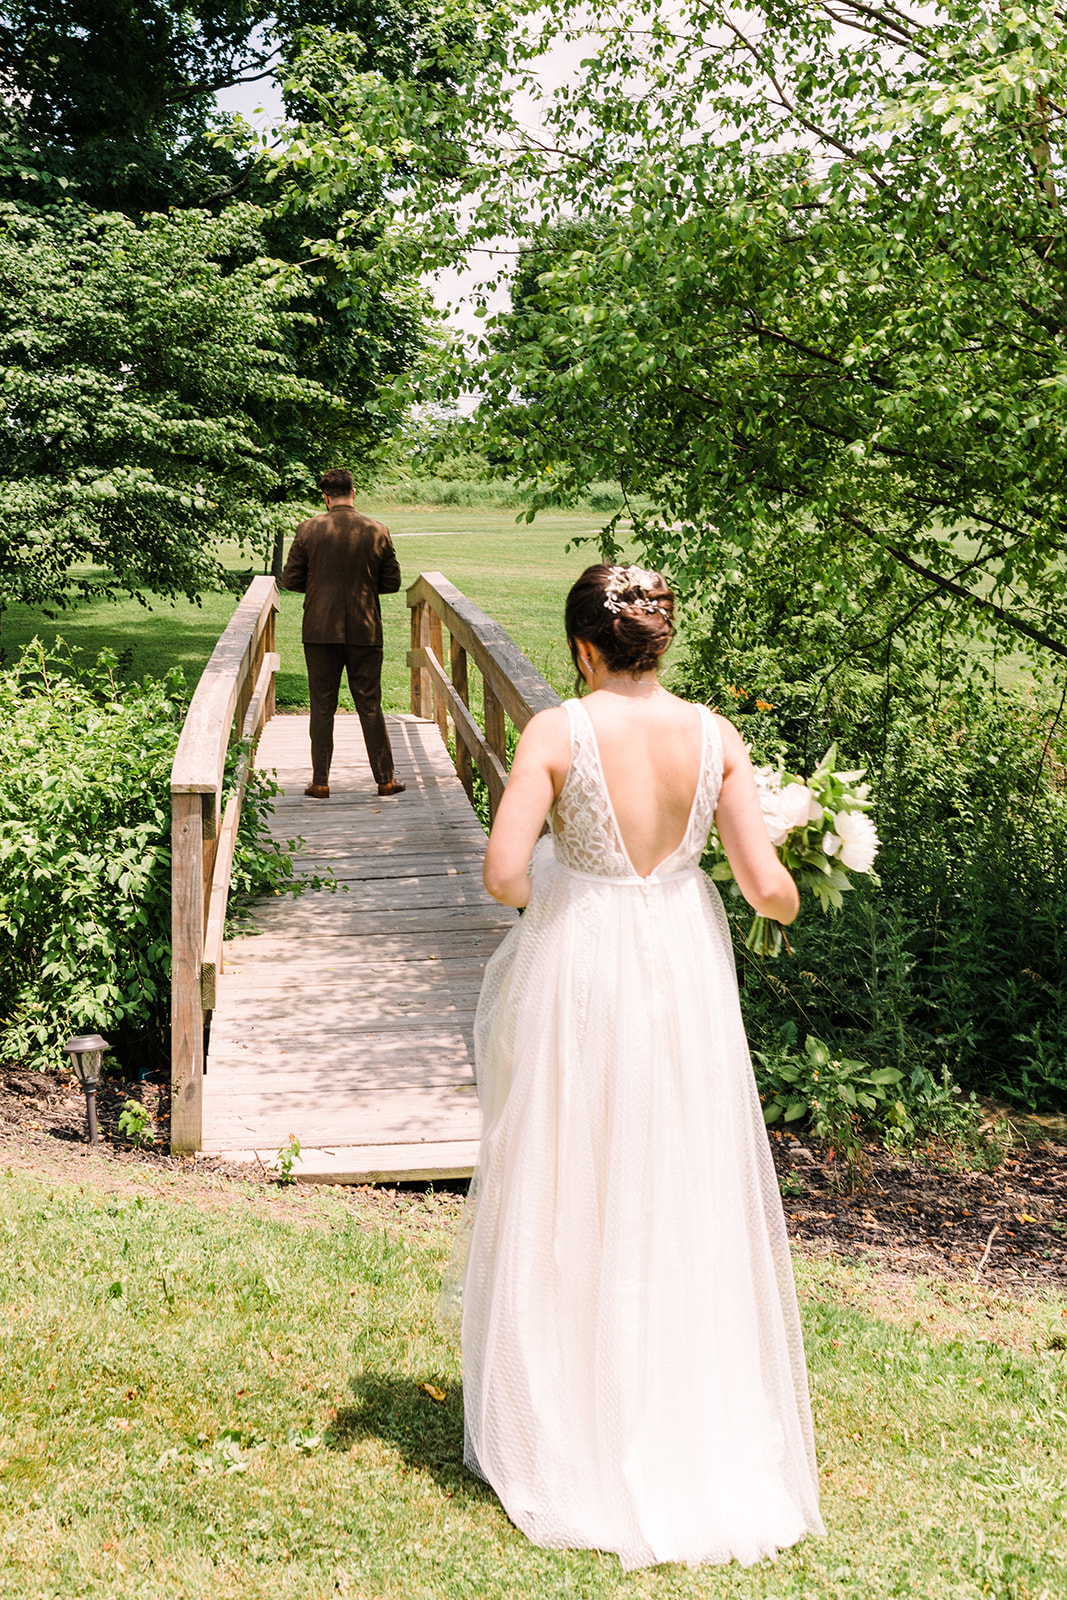 Northeast Ohio wedding on a gorgeous farm surrounded by pastures and so much nature